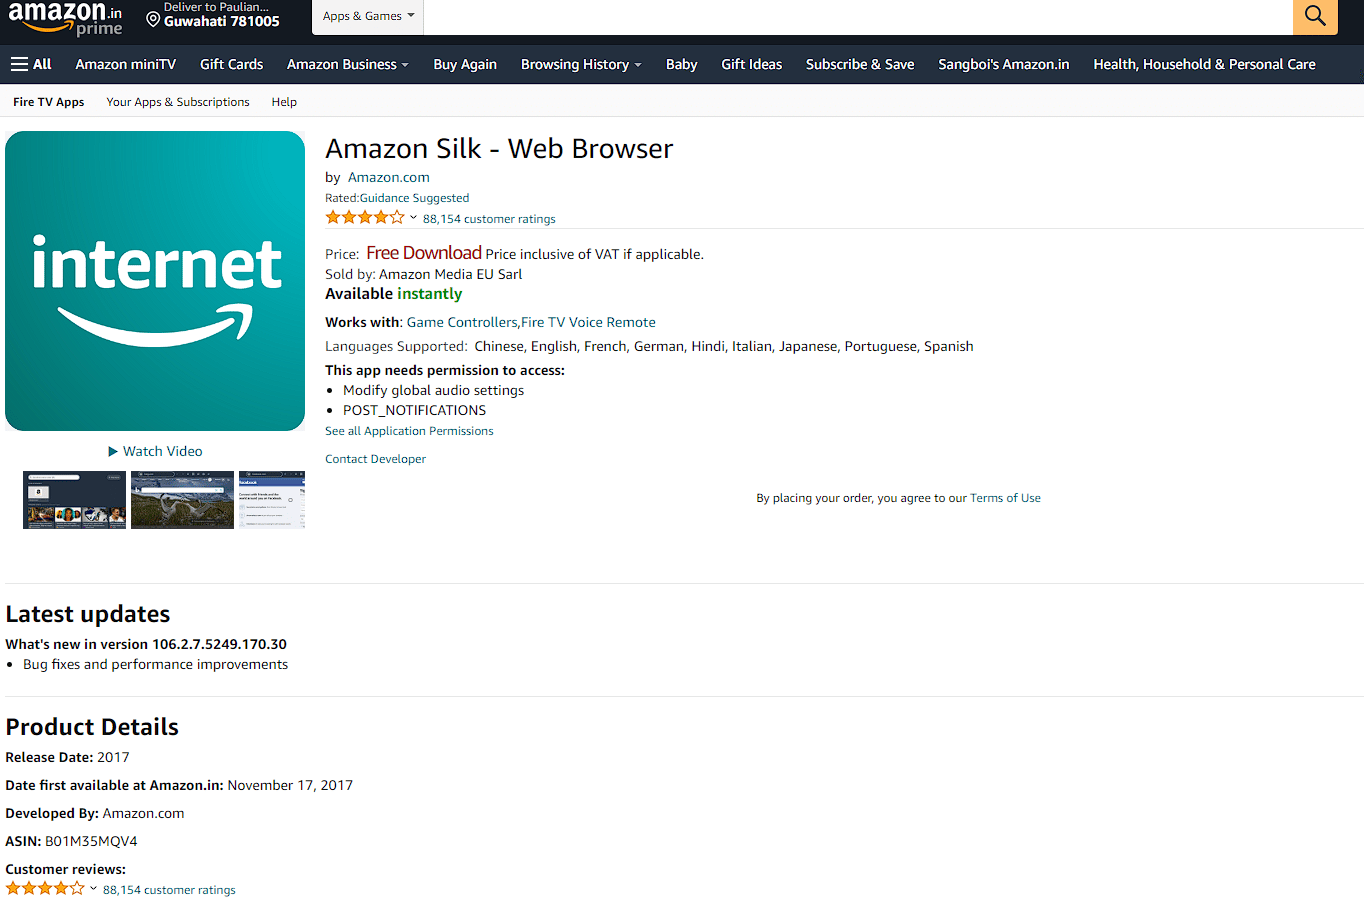 Amazon Silk Browser for TV